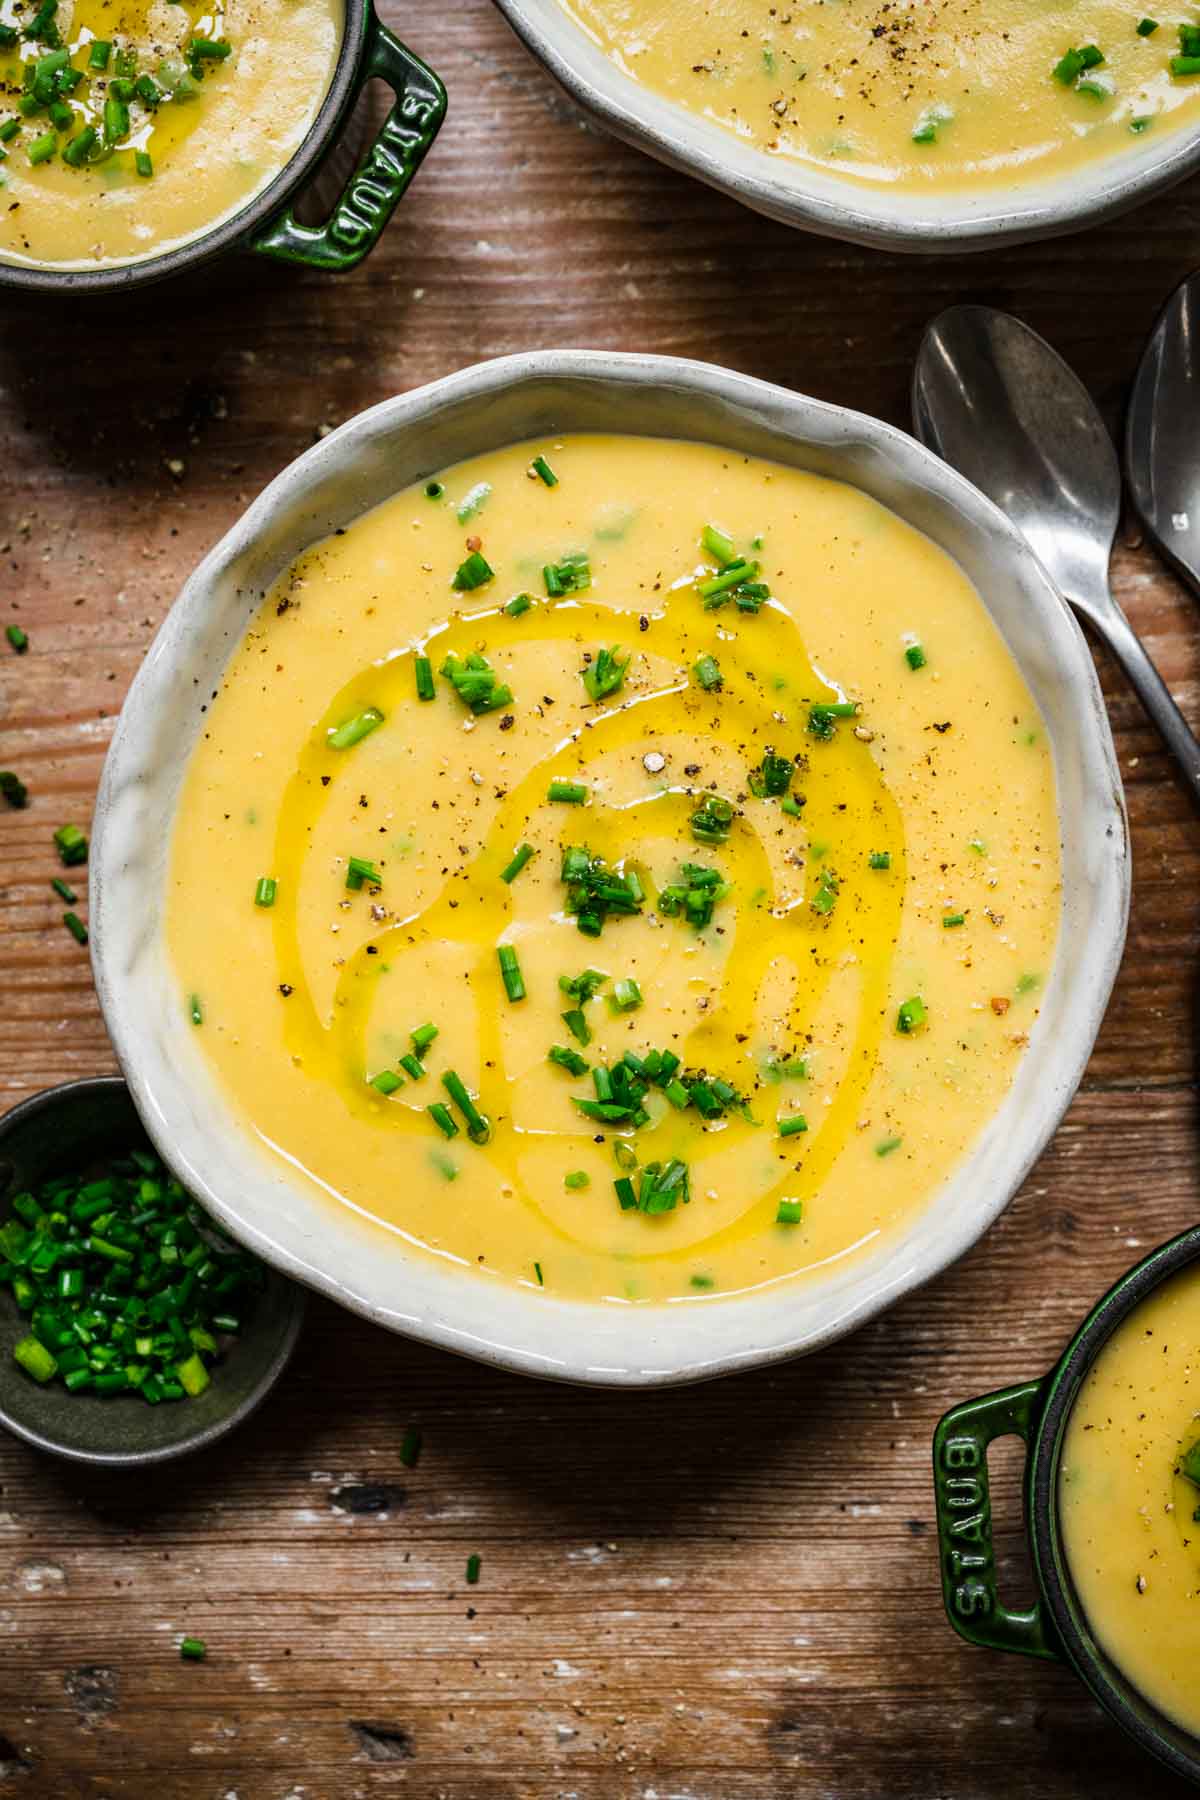 Overhead view of potato leek soup in a bowl garnished with chives, oil, and pepper.